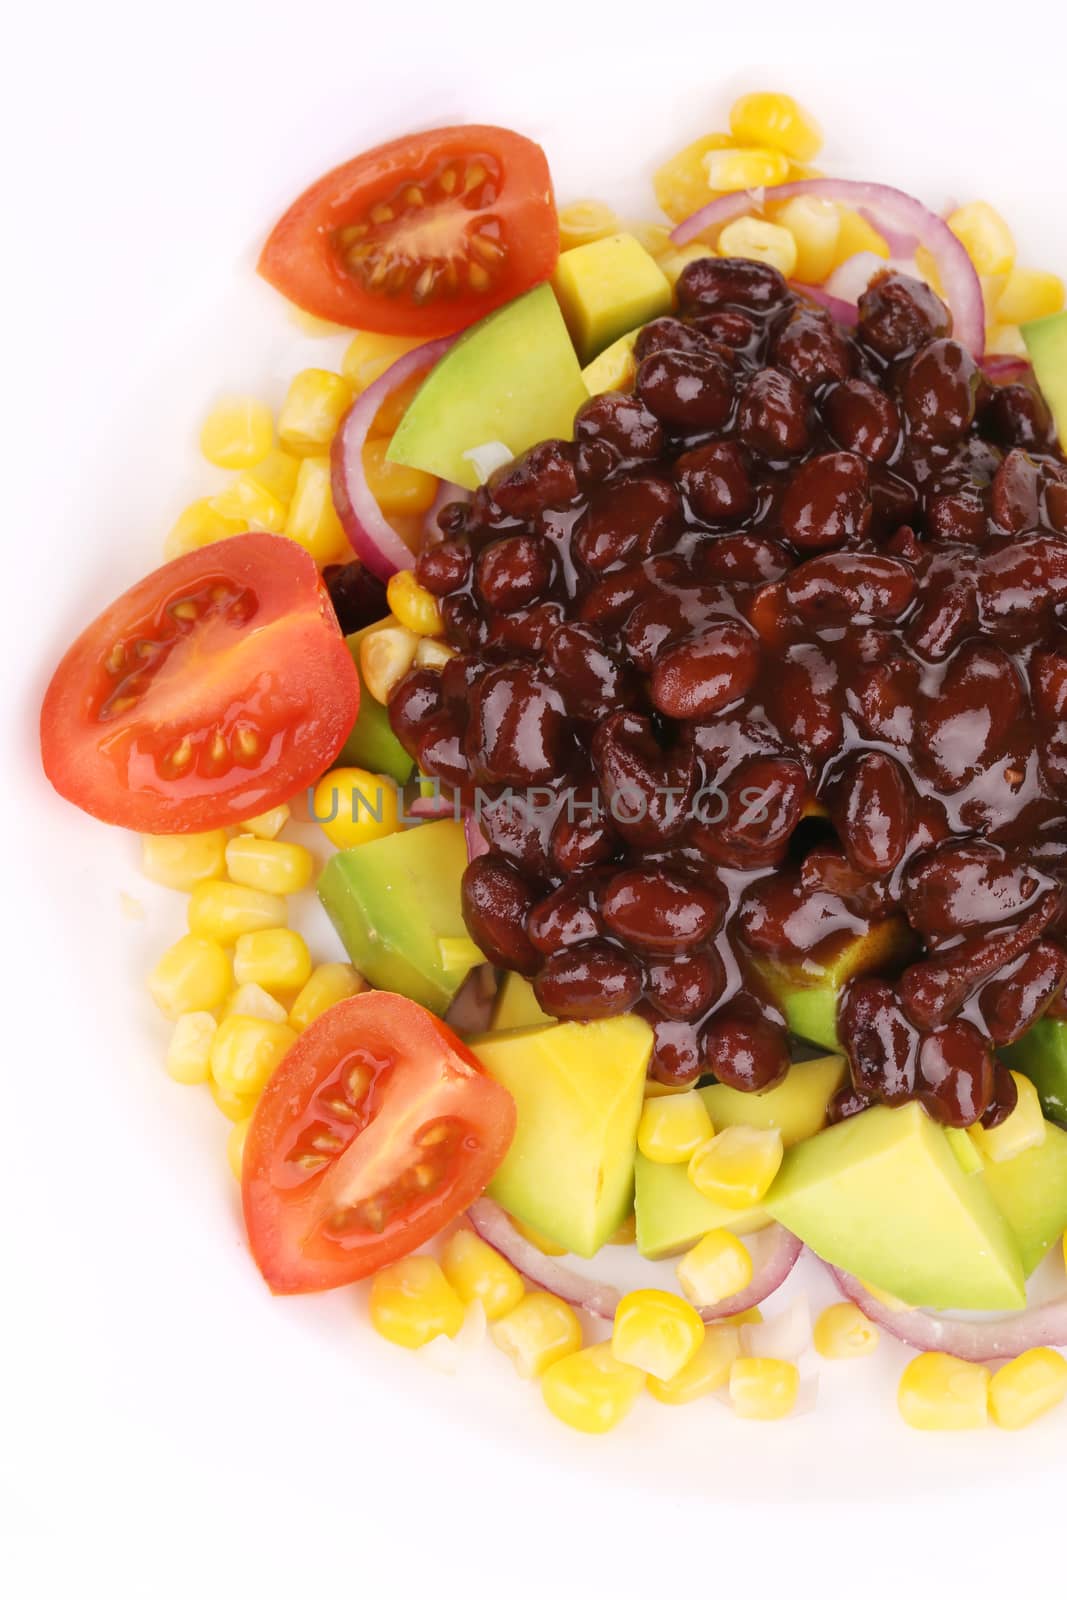 Red beans salad. by indigolotos